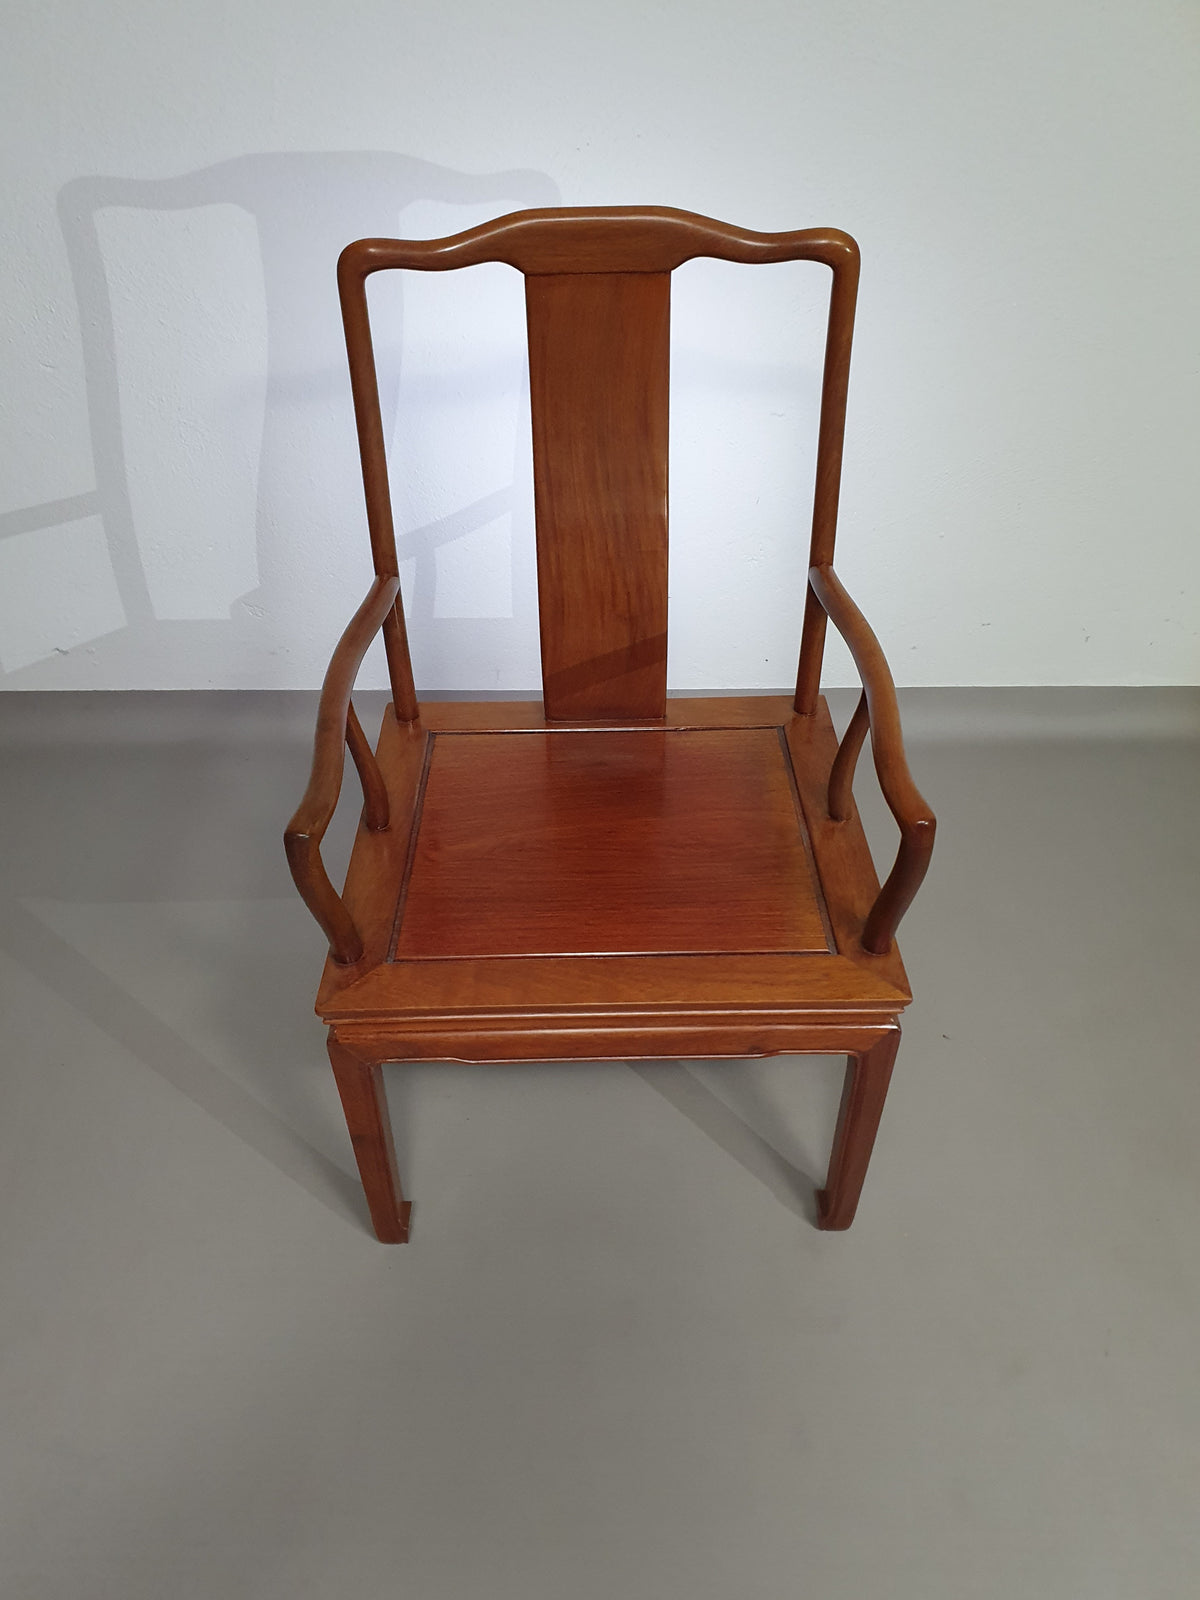 Vintage Chinese Ming rosewood chair.